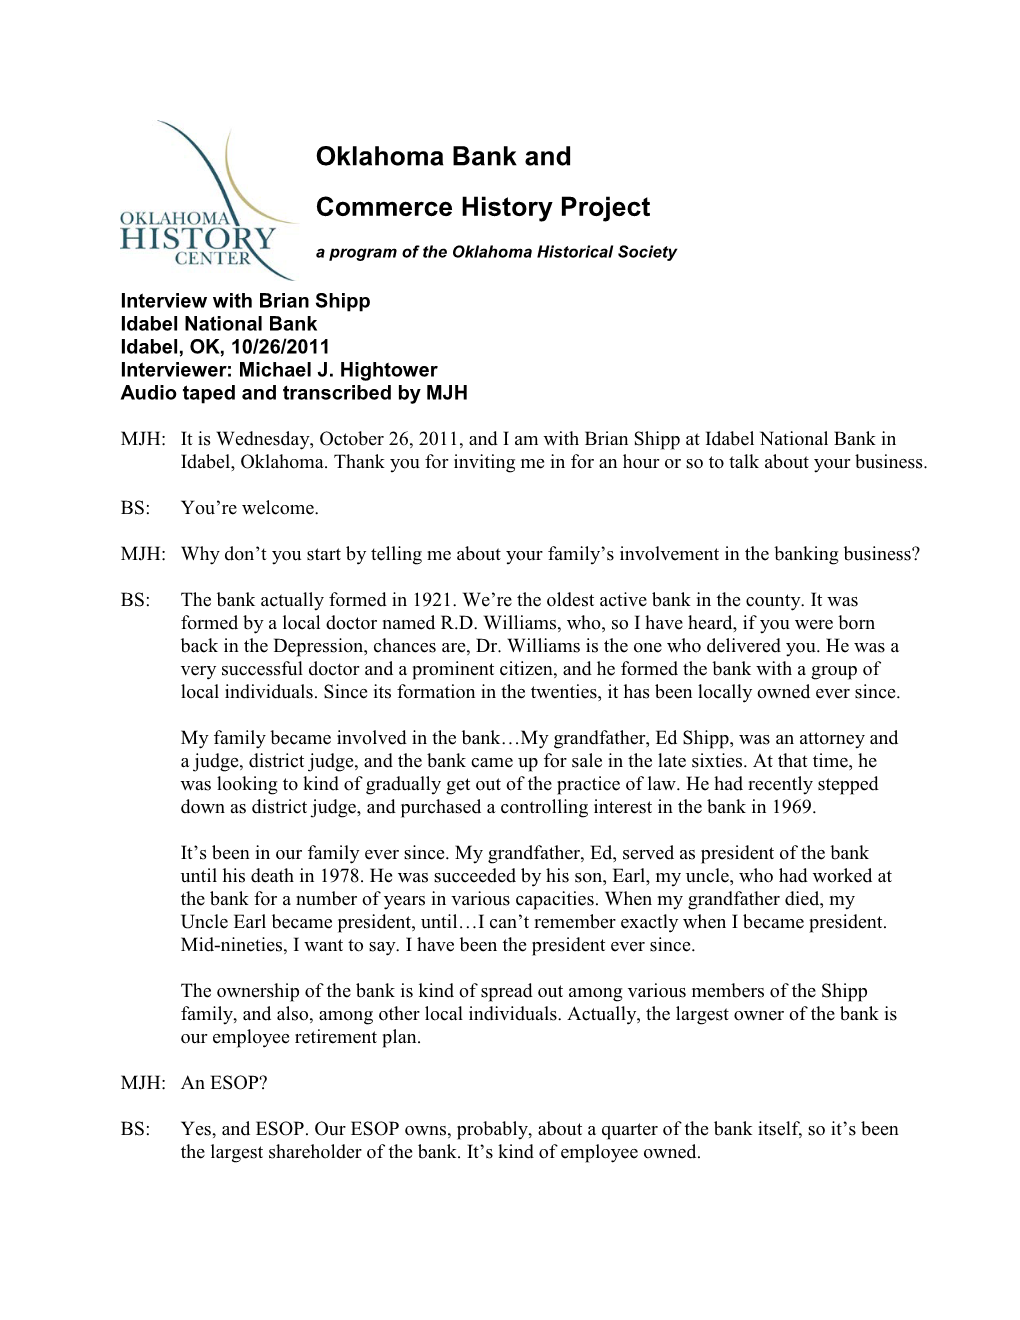 Oklahoma Bank and Commerce History Project